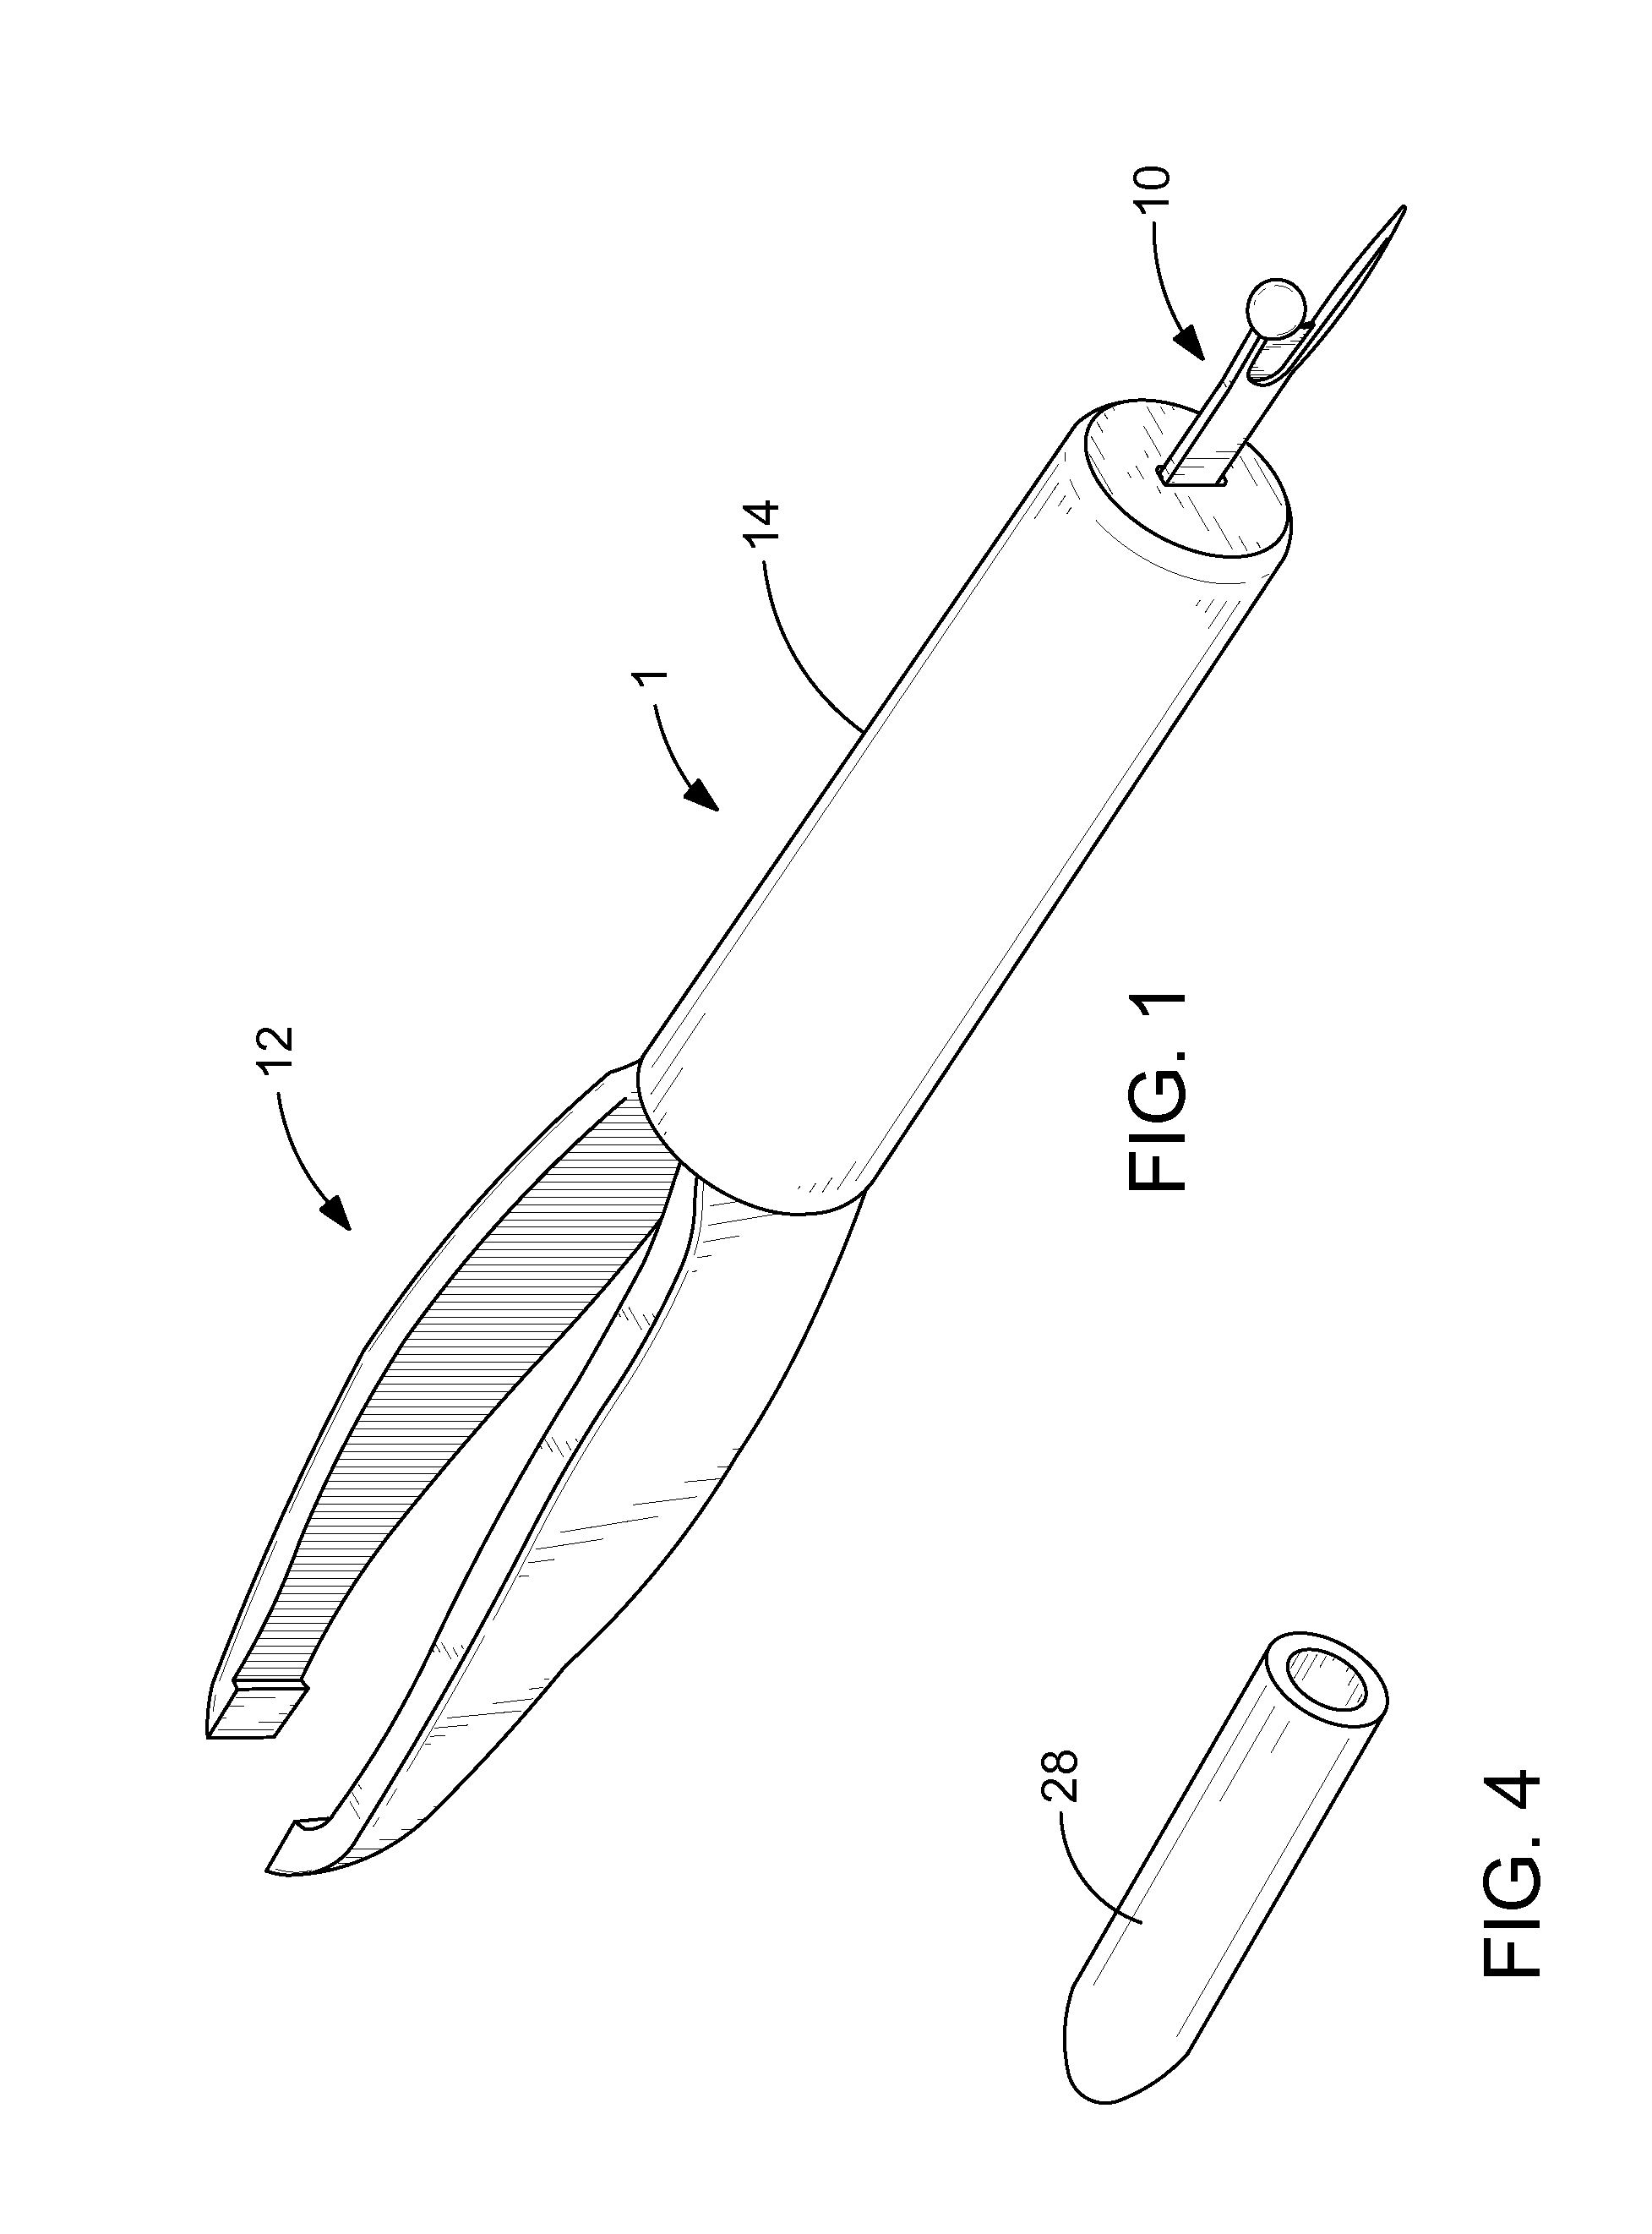 Thread removal device